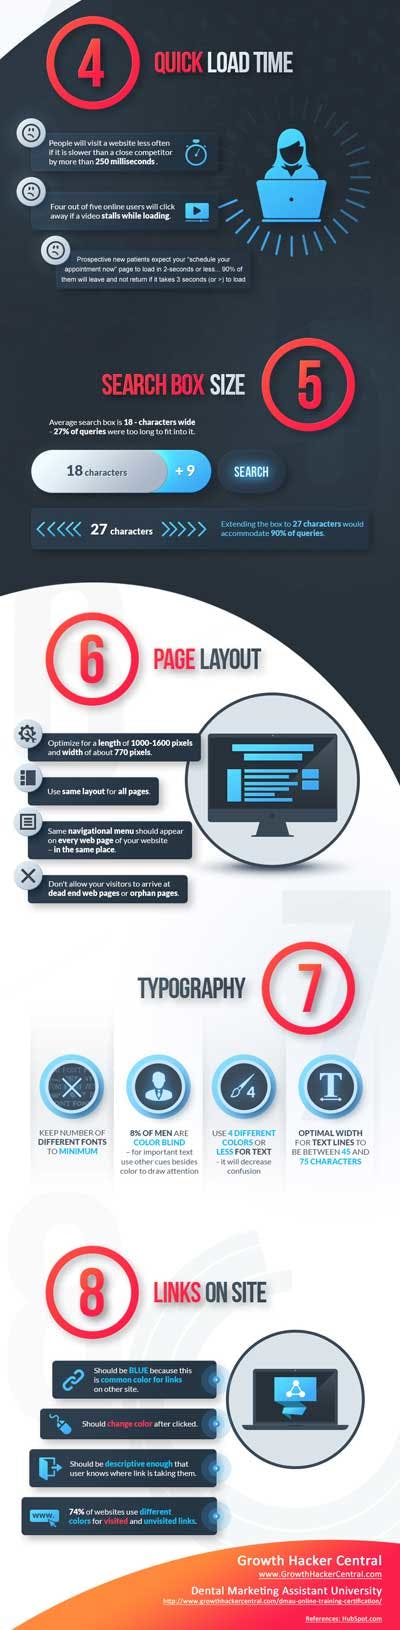 More Website Infographic B